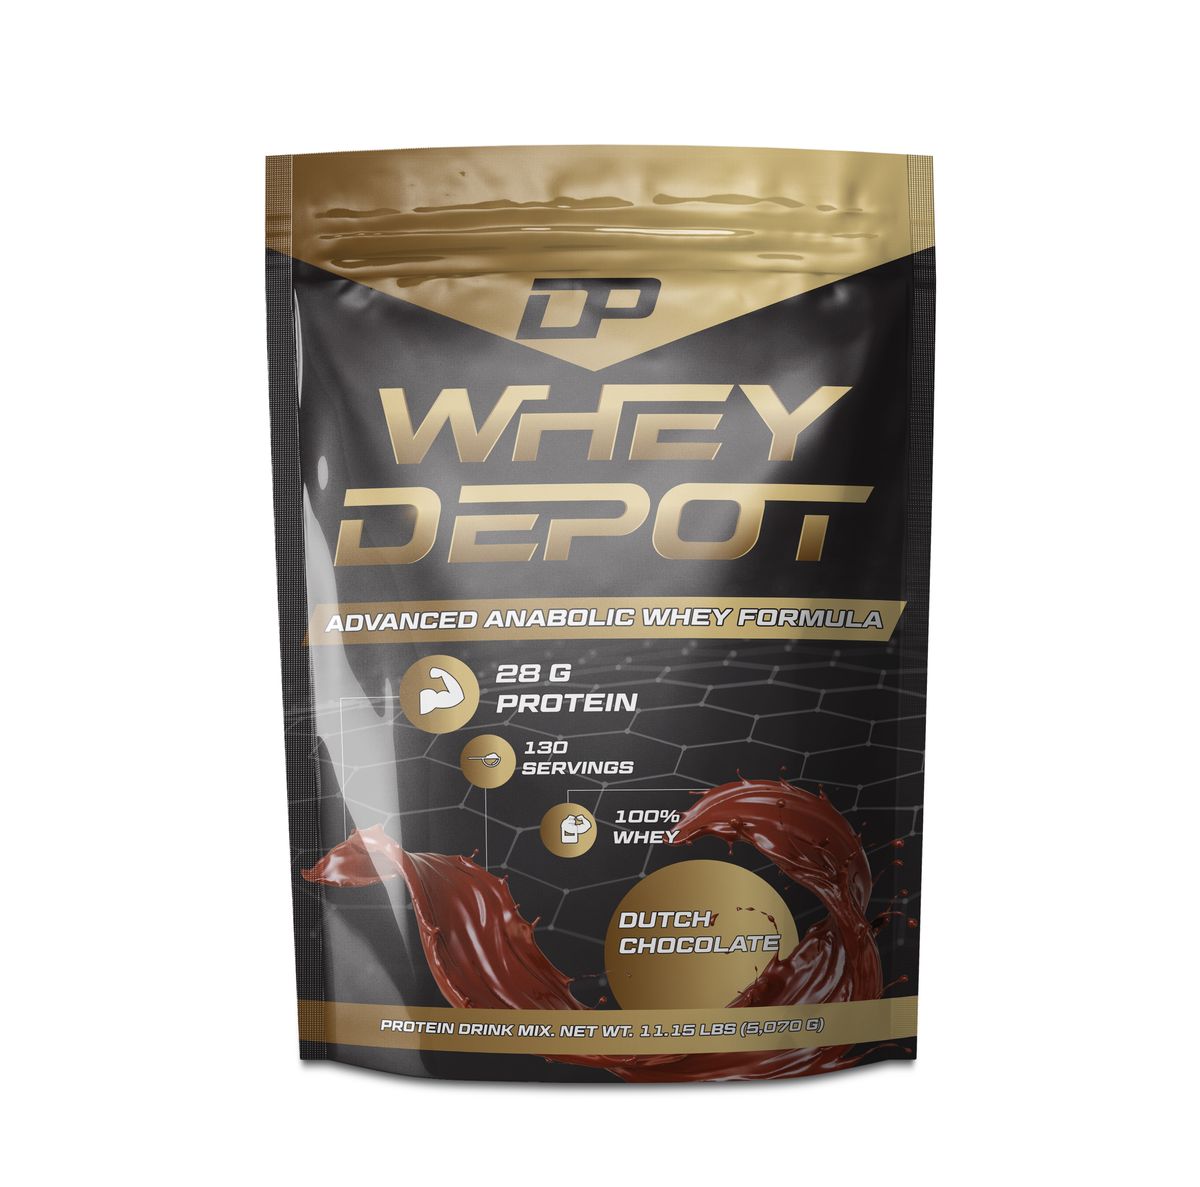 DP Whey Depot limited flavours Available.